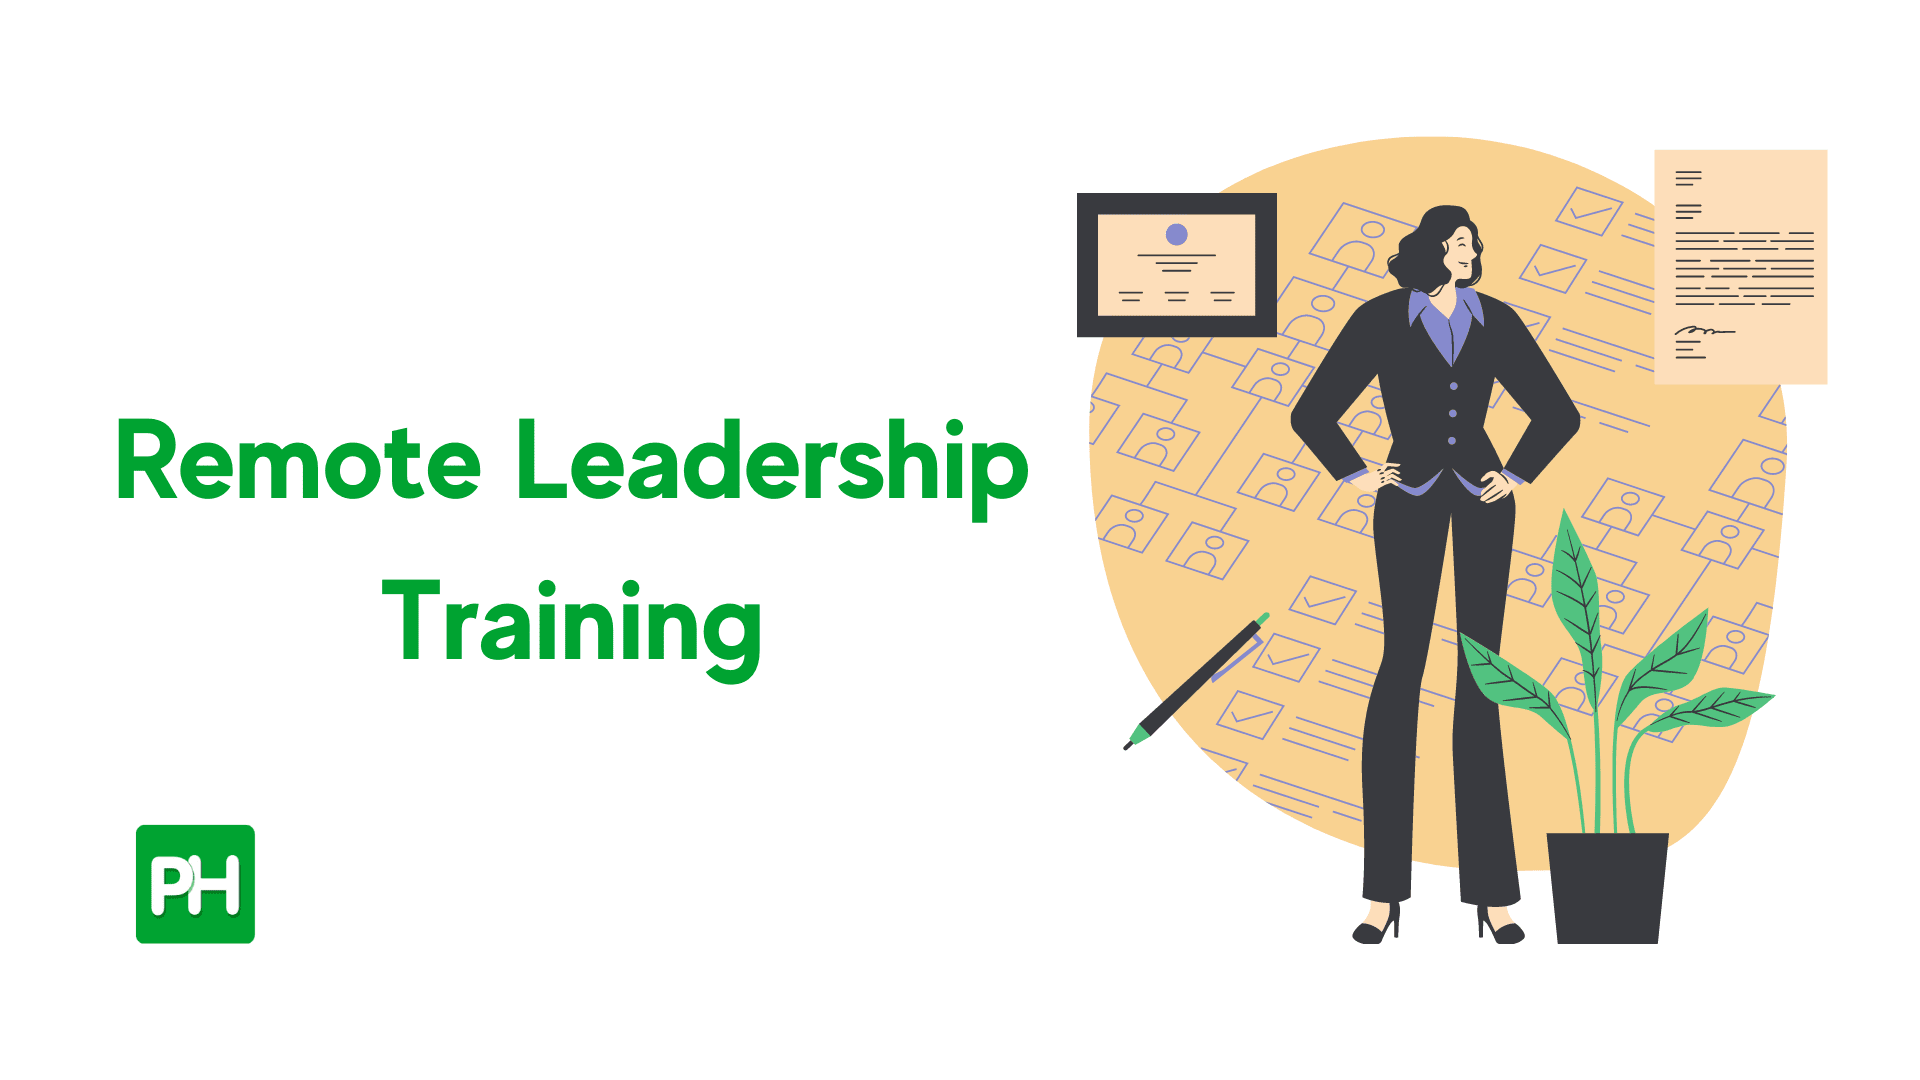 Remote Leadership Training: Why all managers need it, and how to get it